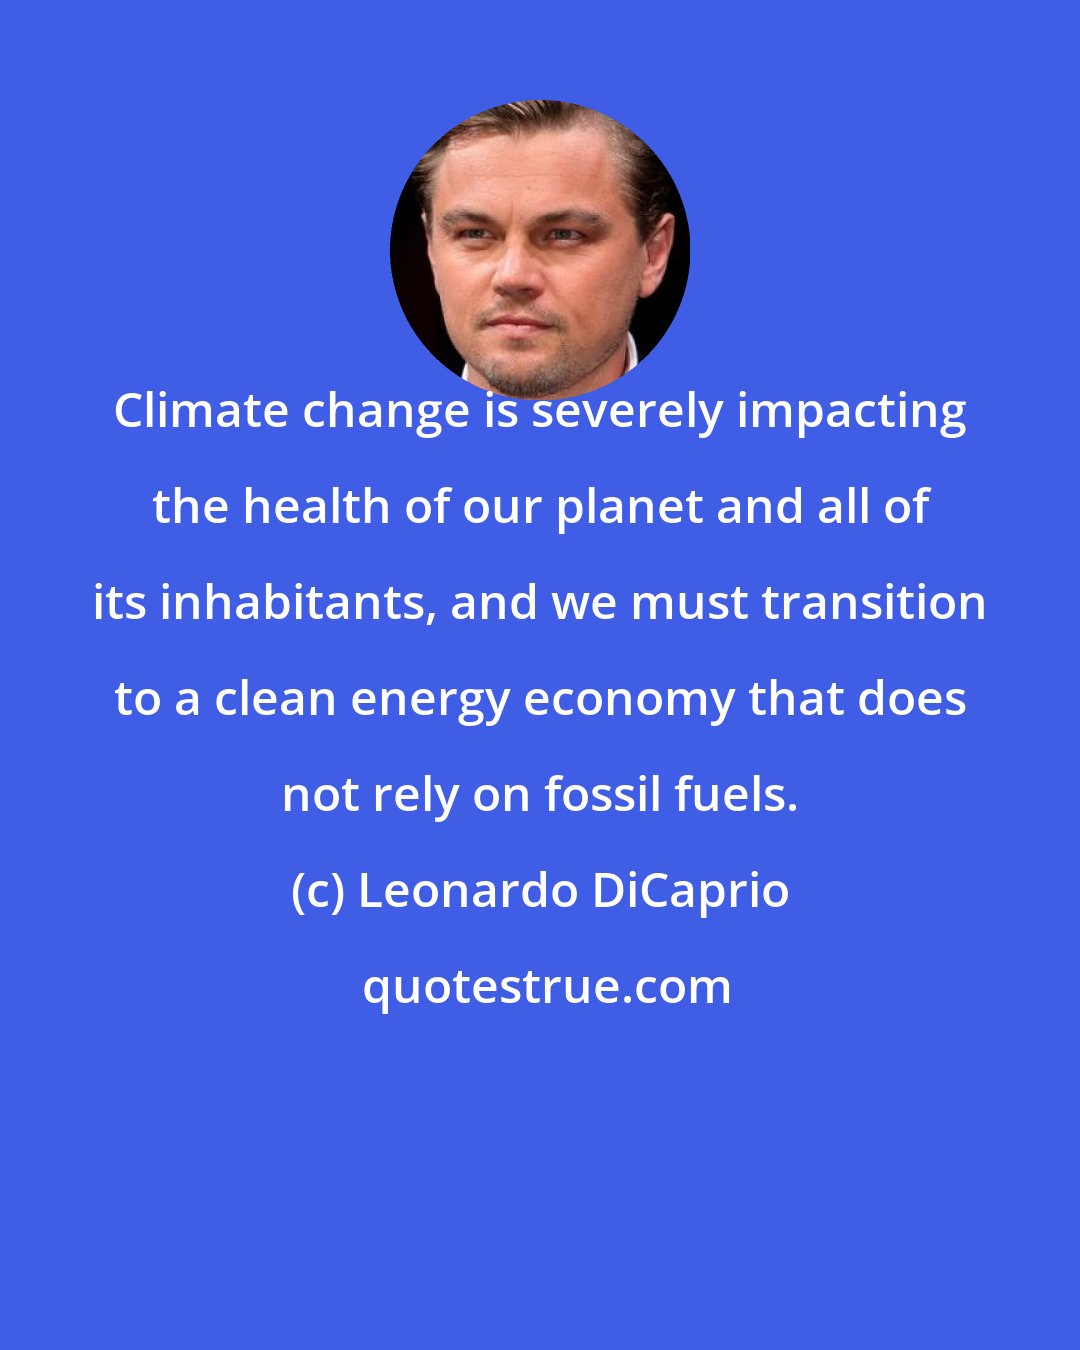 Leonardo DiCaprio: Climate change is severely impacting the health of our planet and all of its inhabitants, and we must transition to a clean energy economy that does not rely on fossil fuels.